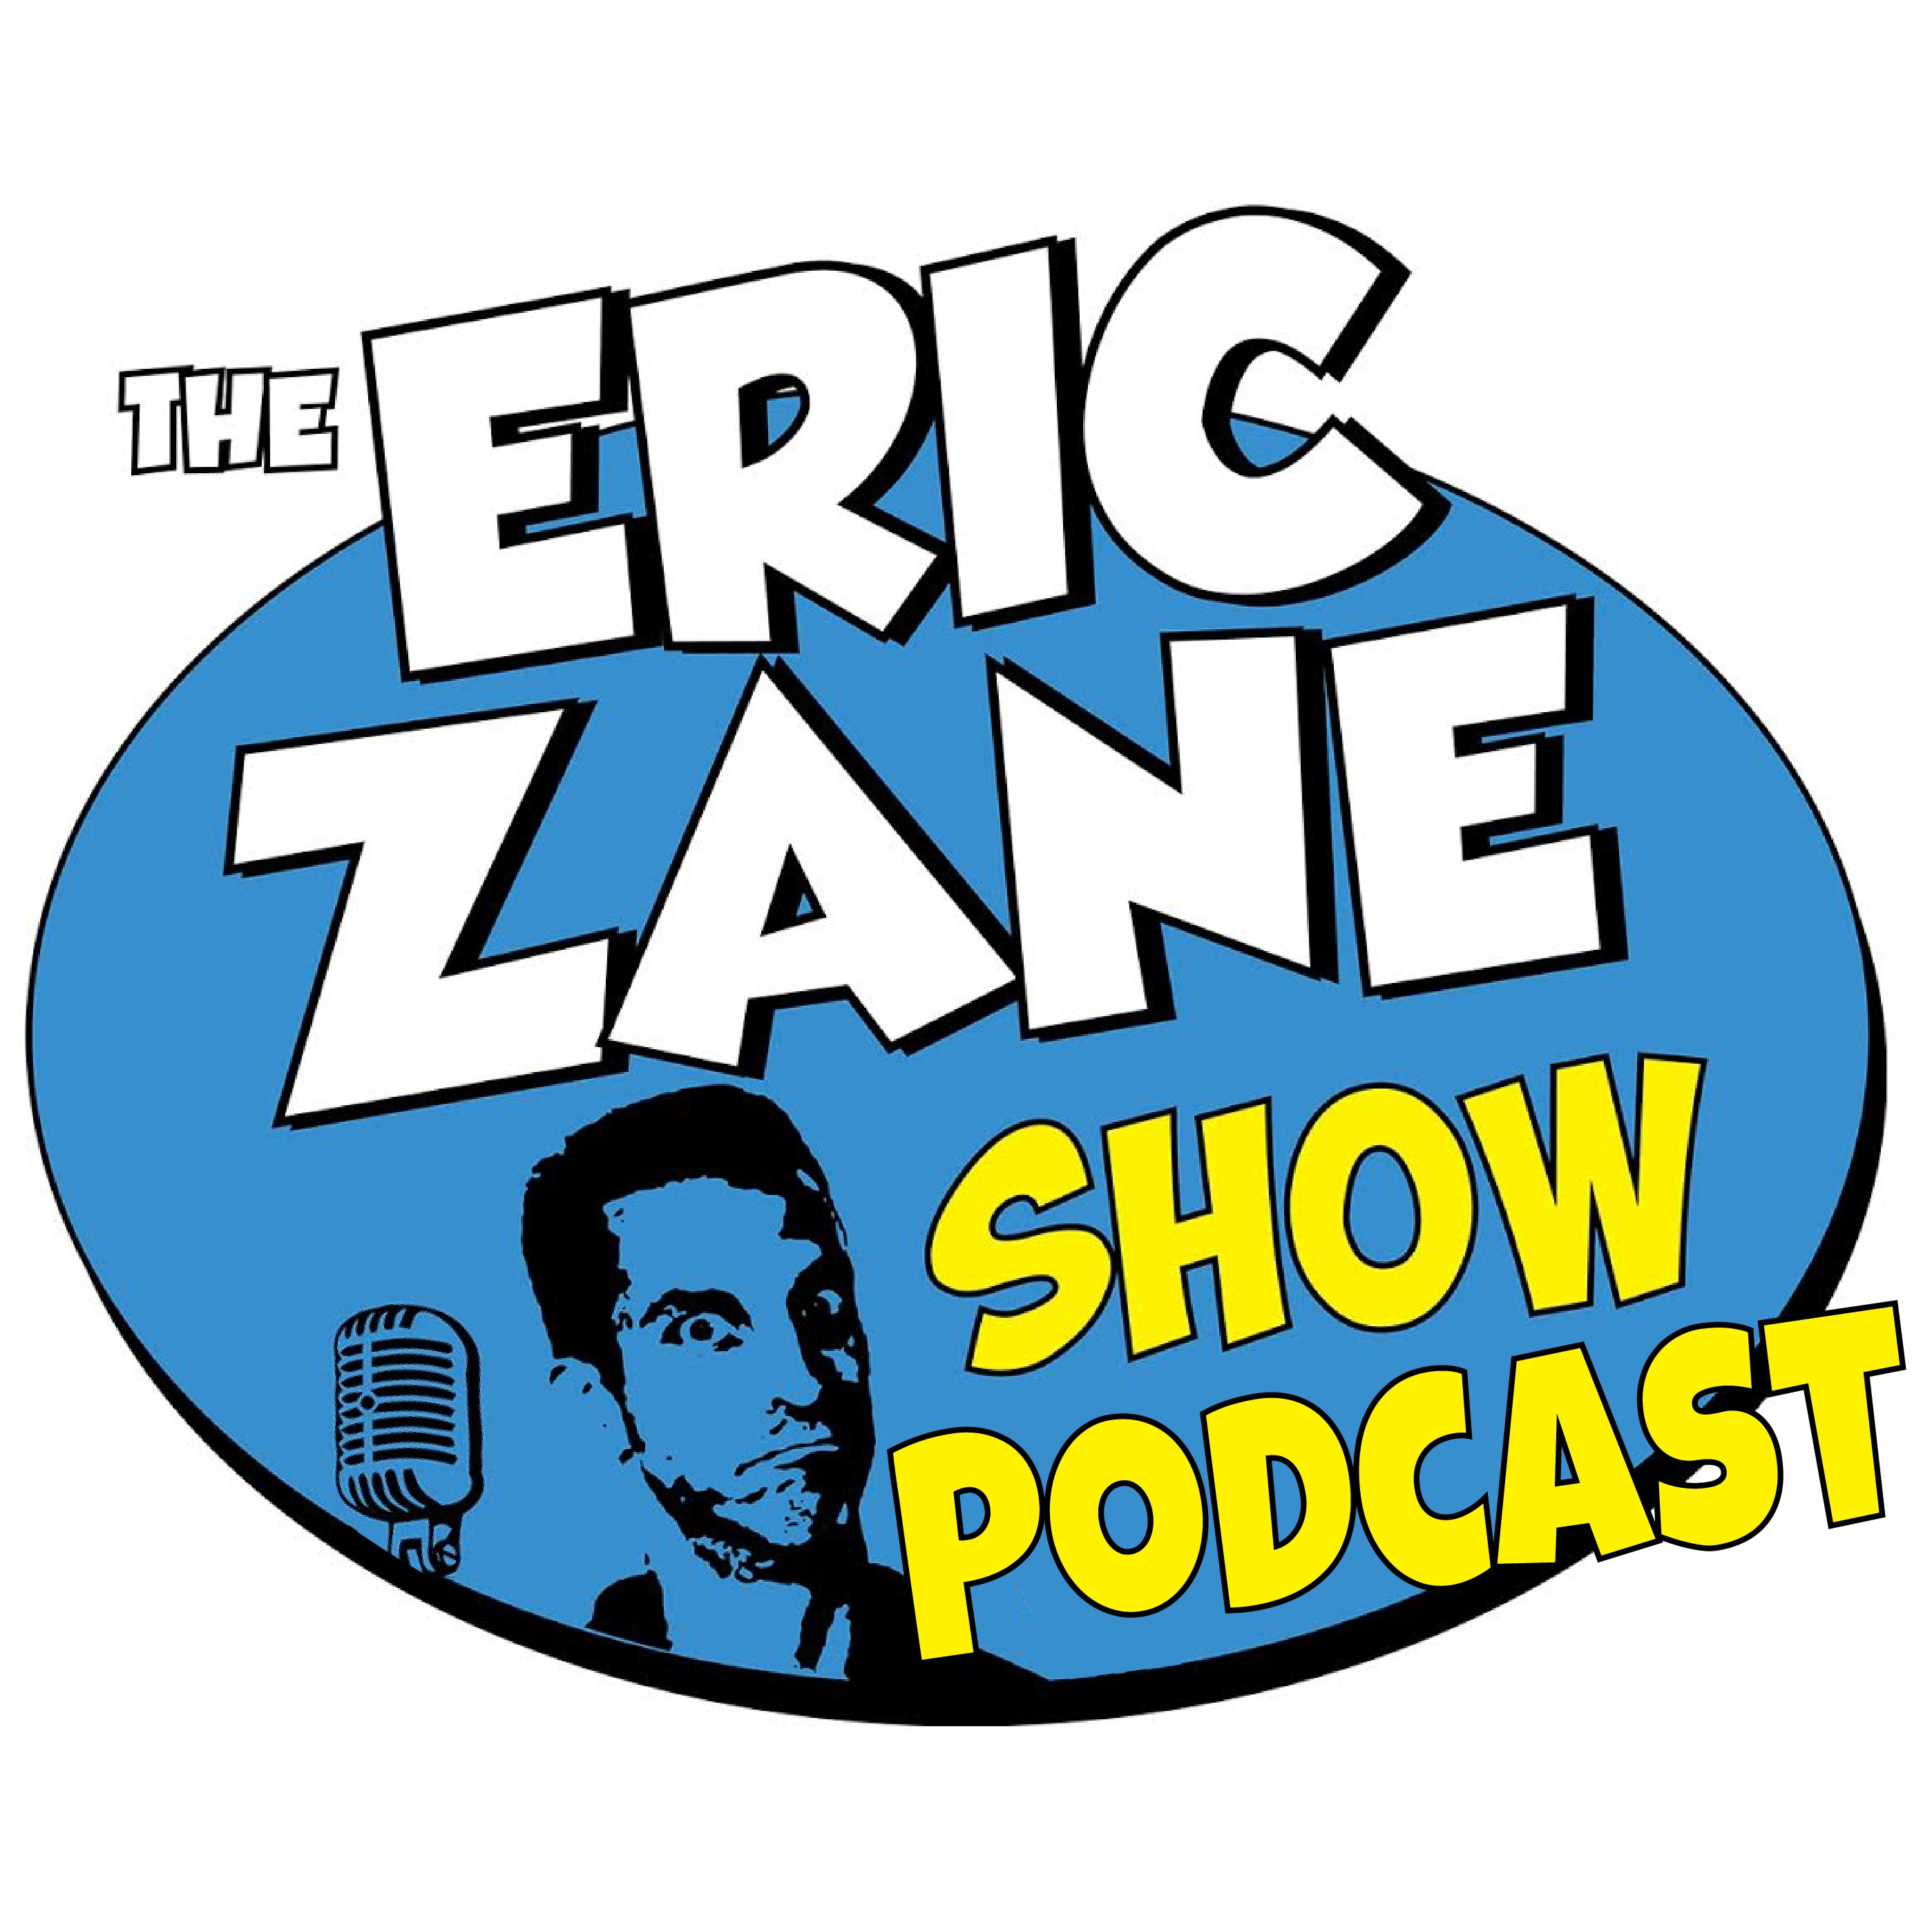 Eric Zane Show Podcast 952 - Former NFL player's kid into child porno - allegedly